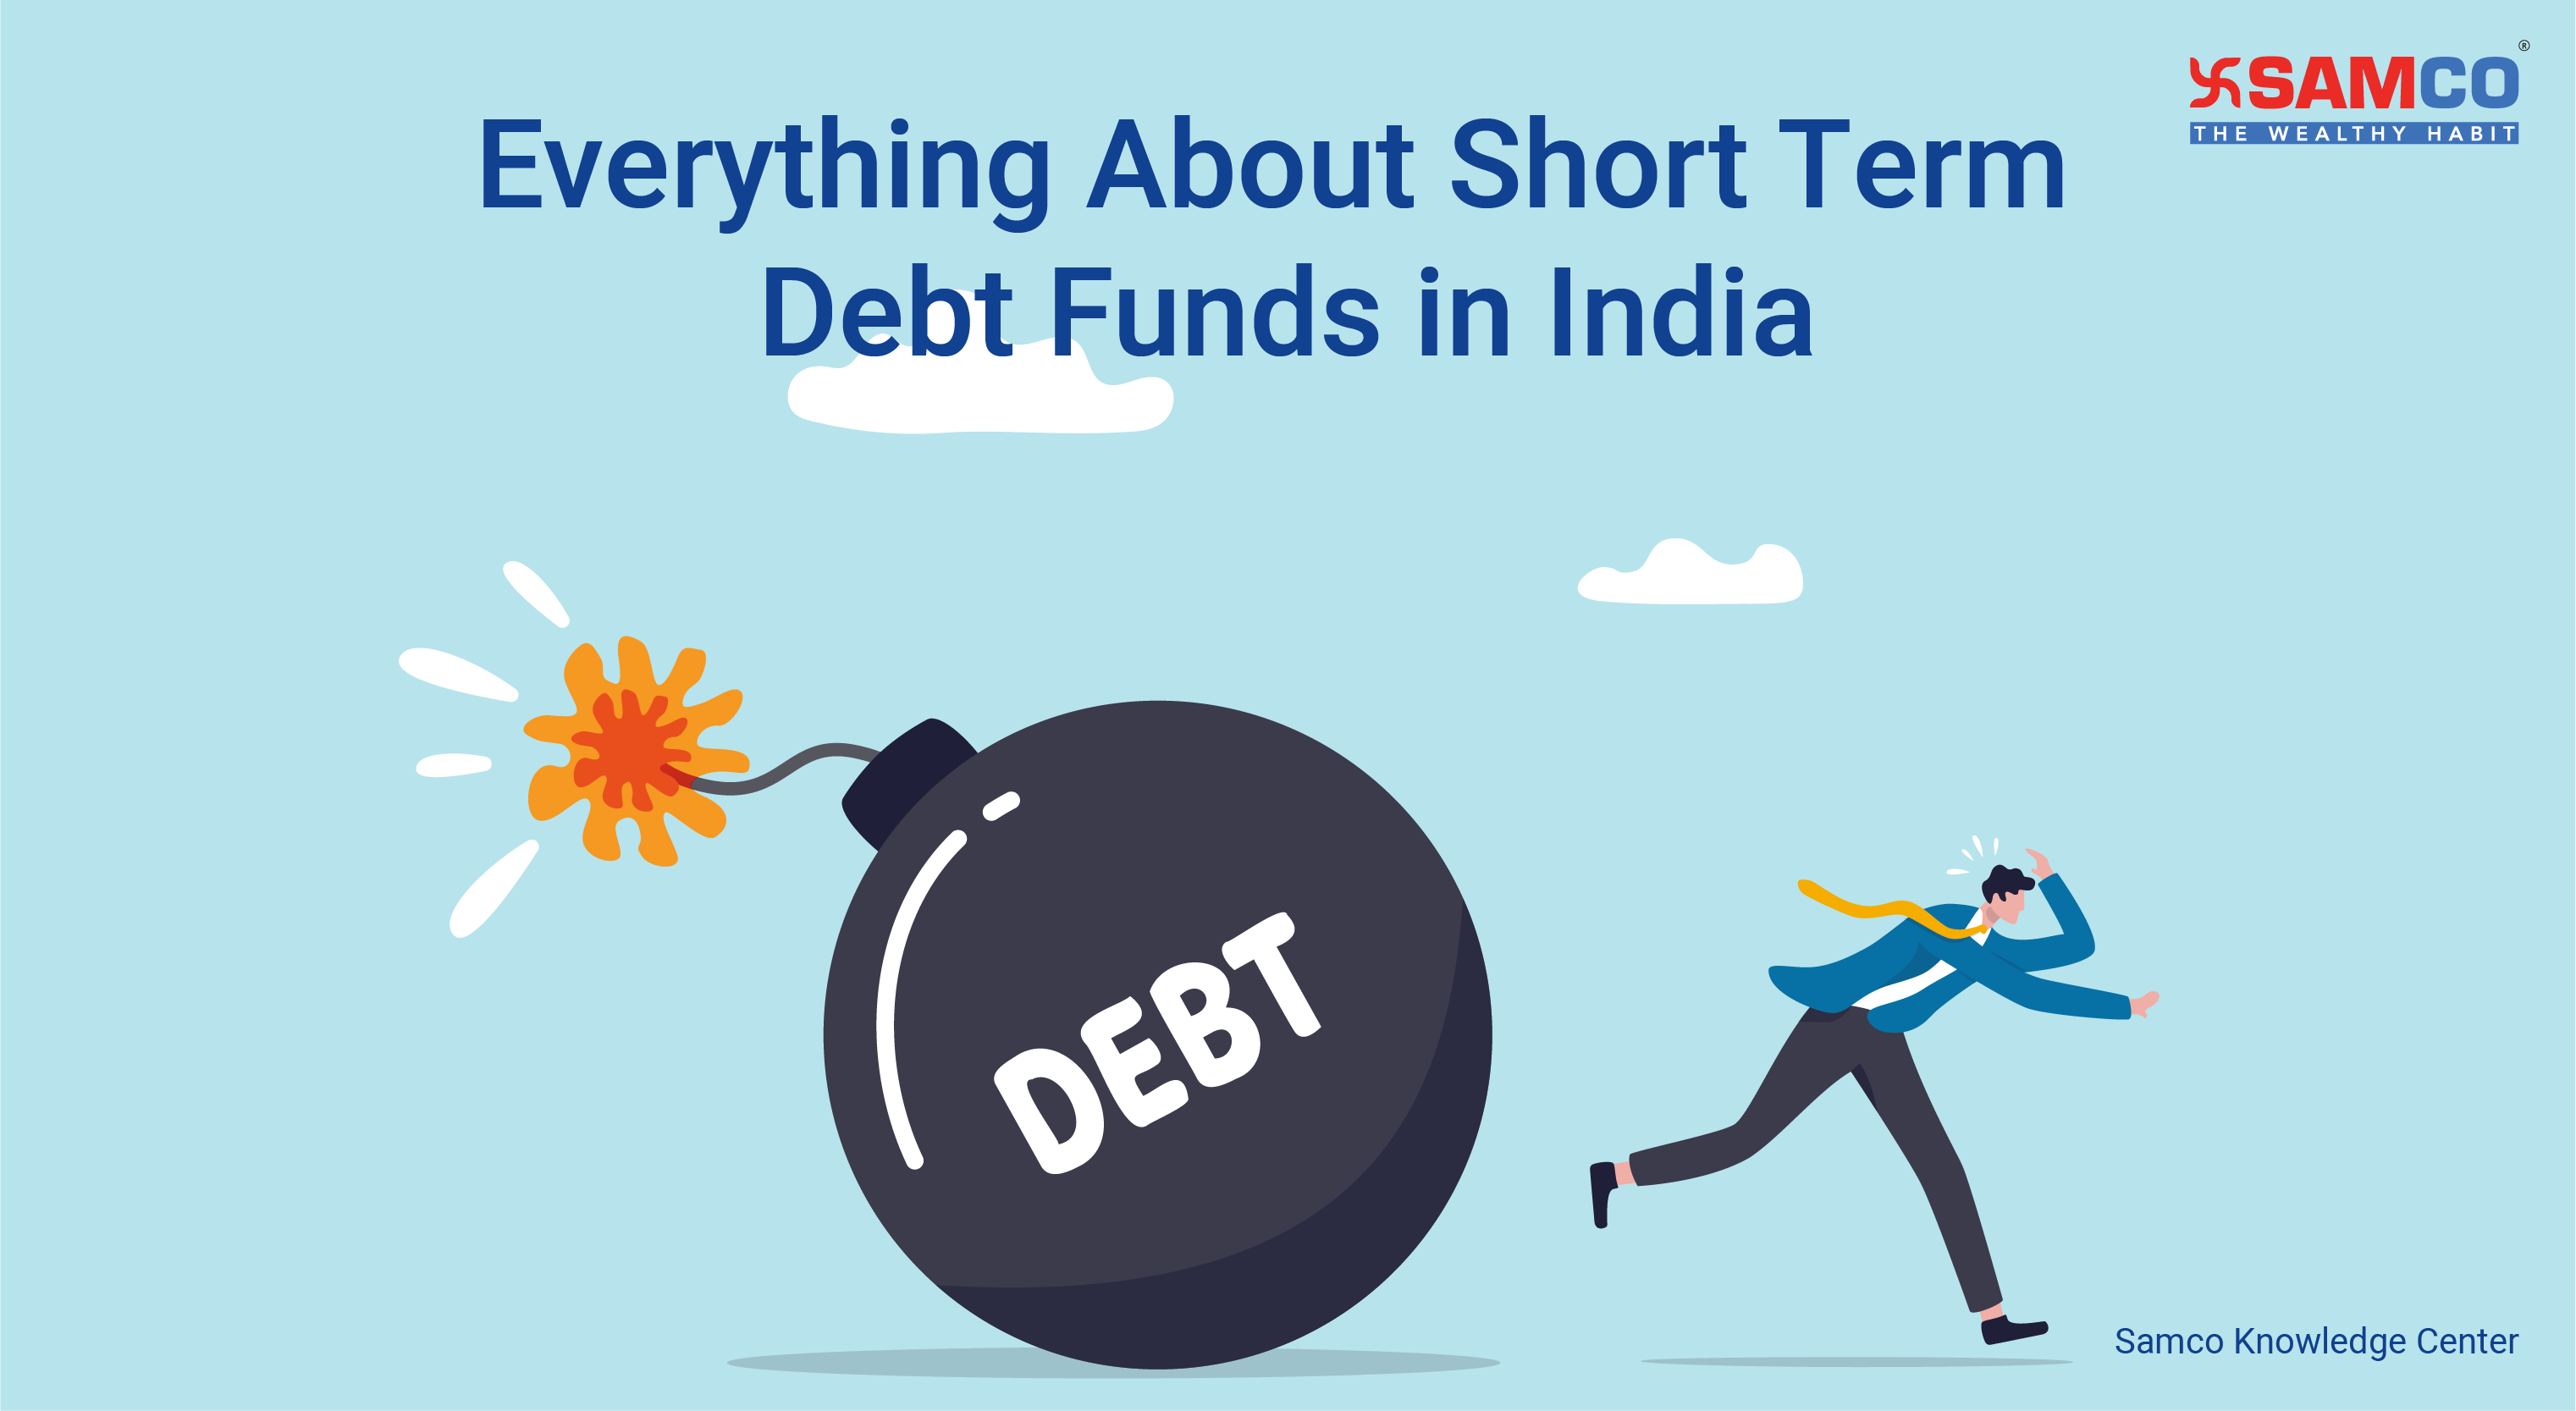 Everything About Short Term Debt Funds in India